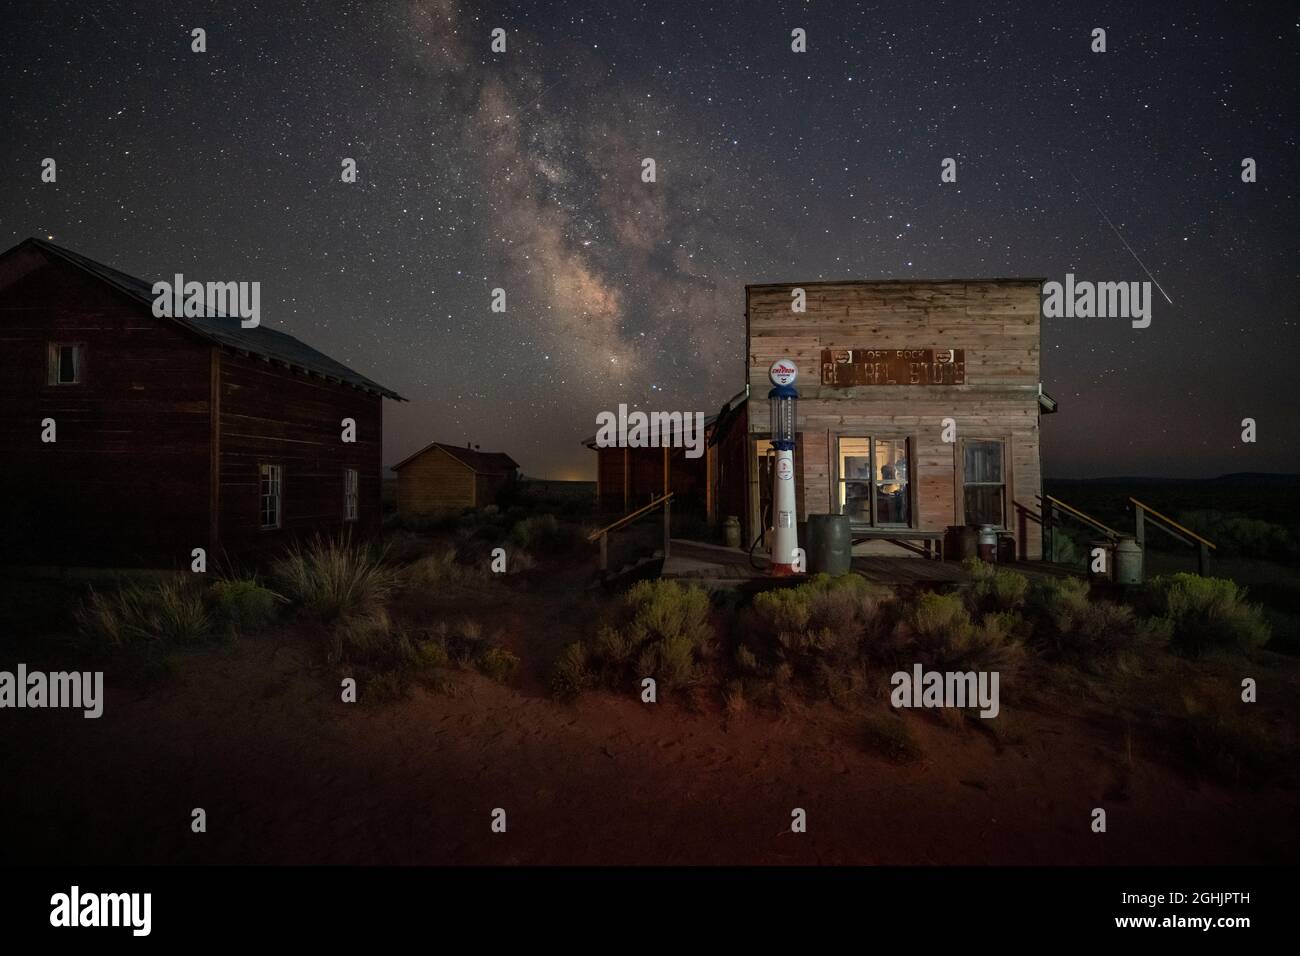 USA, Oregon, Central, Fort Rock Homestead Museum, Astro Sky Stock Photo